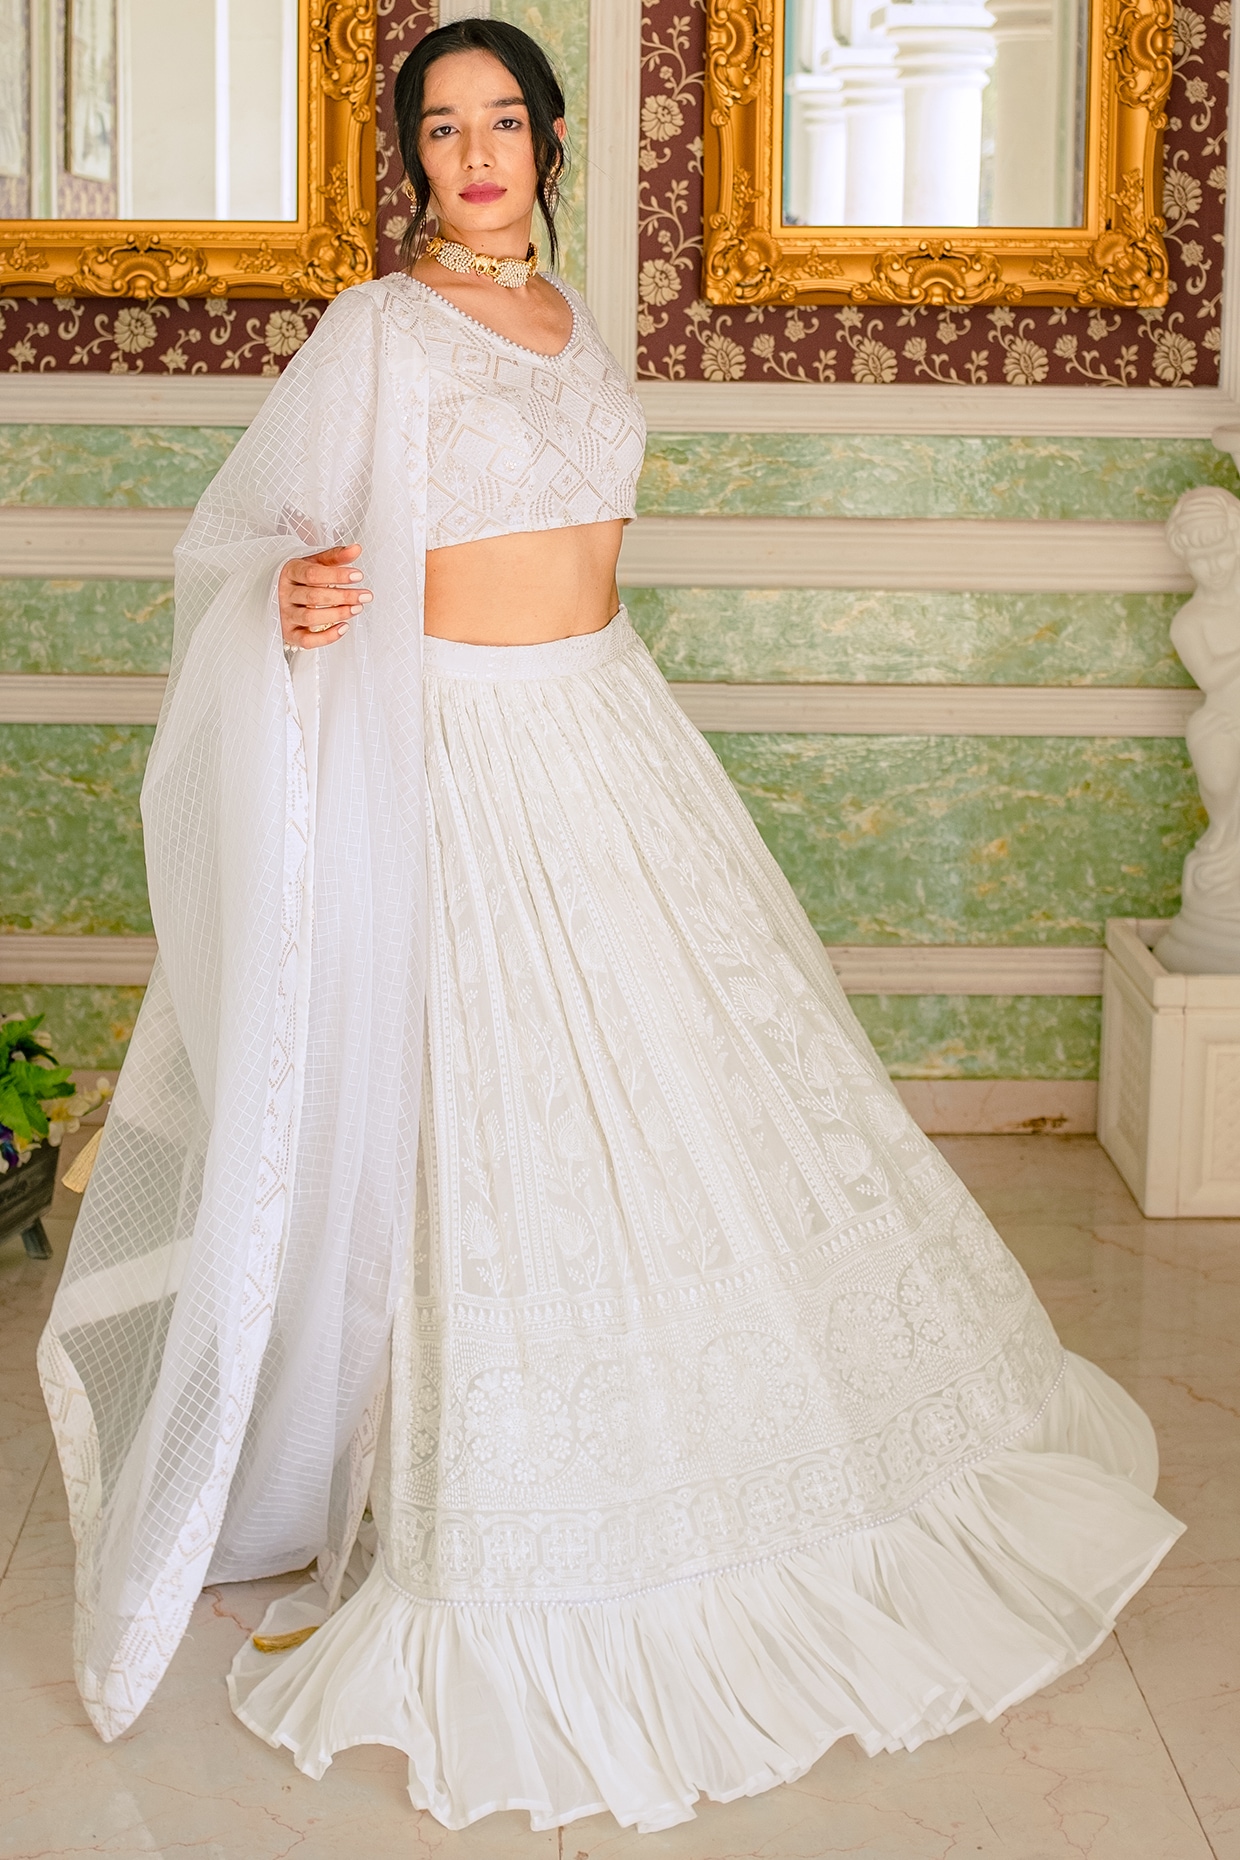 Frontier Raas Xl Peach Lehenga - Get Best Price from Manufacturers &  Suppliers in India